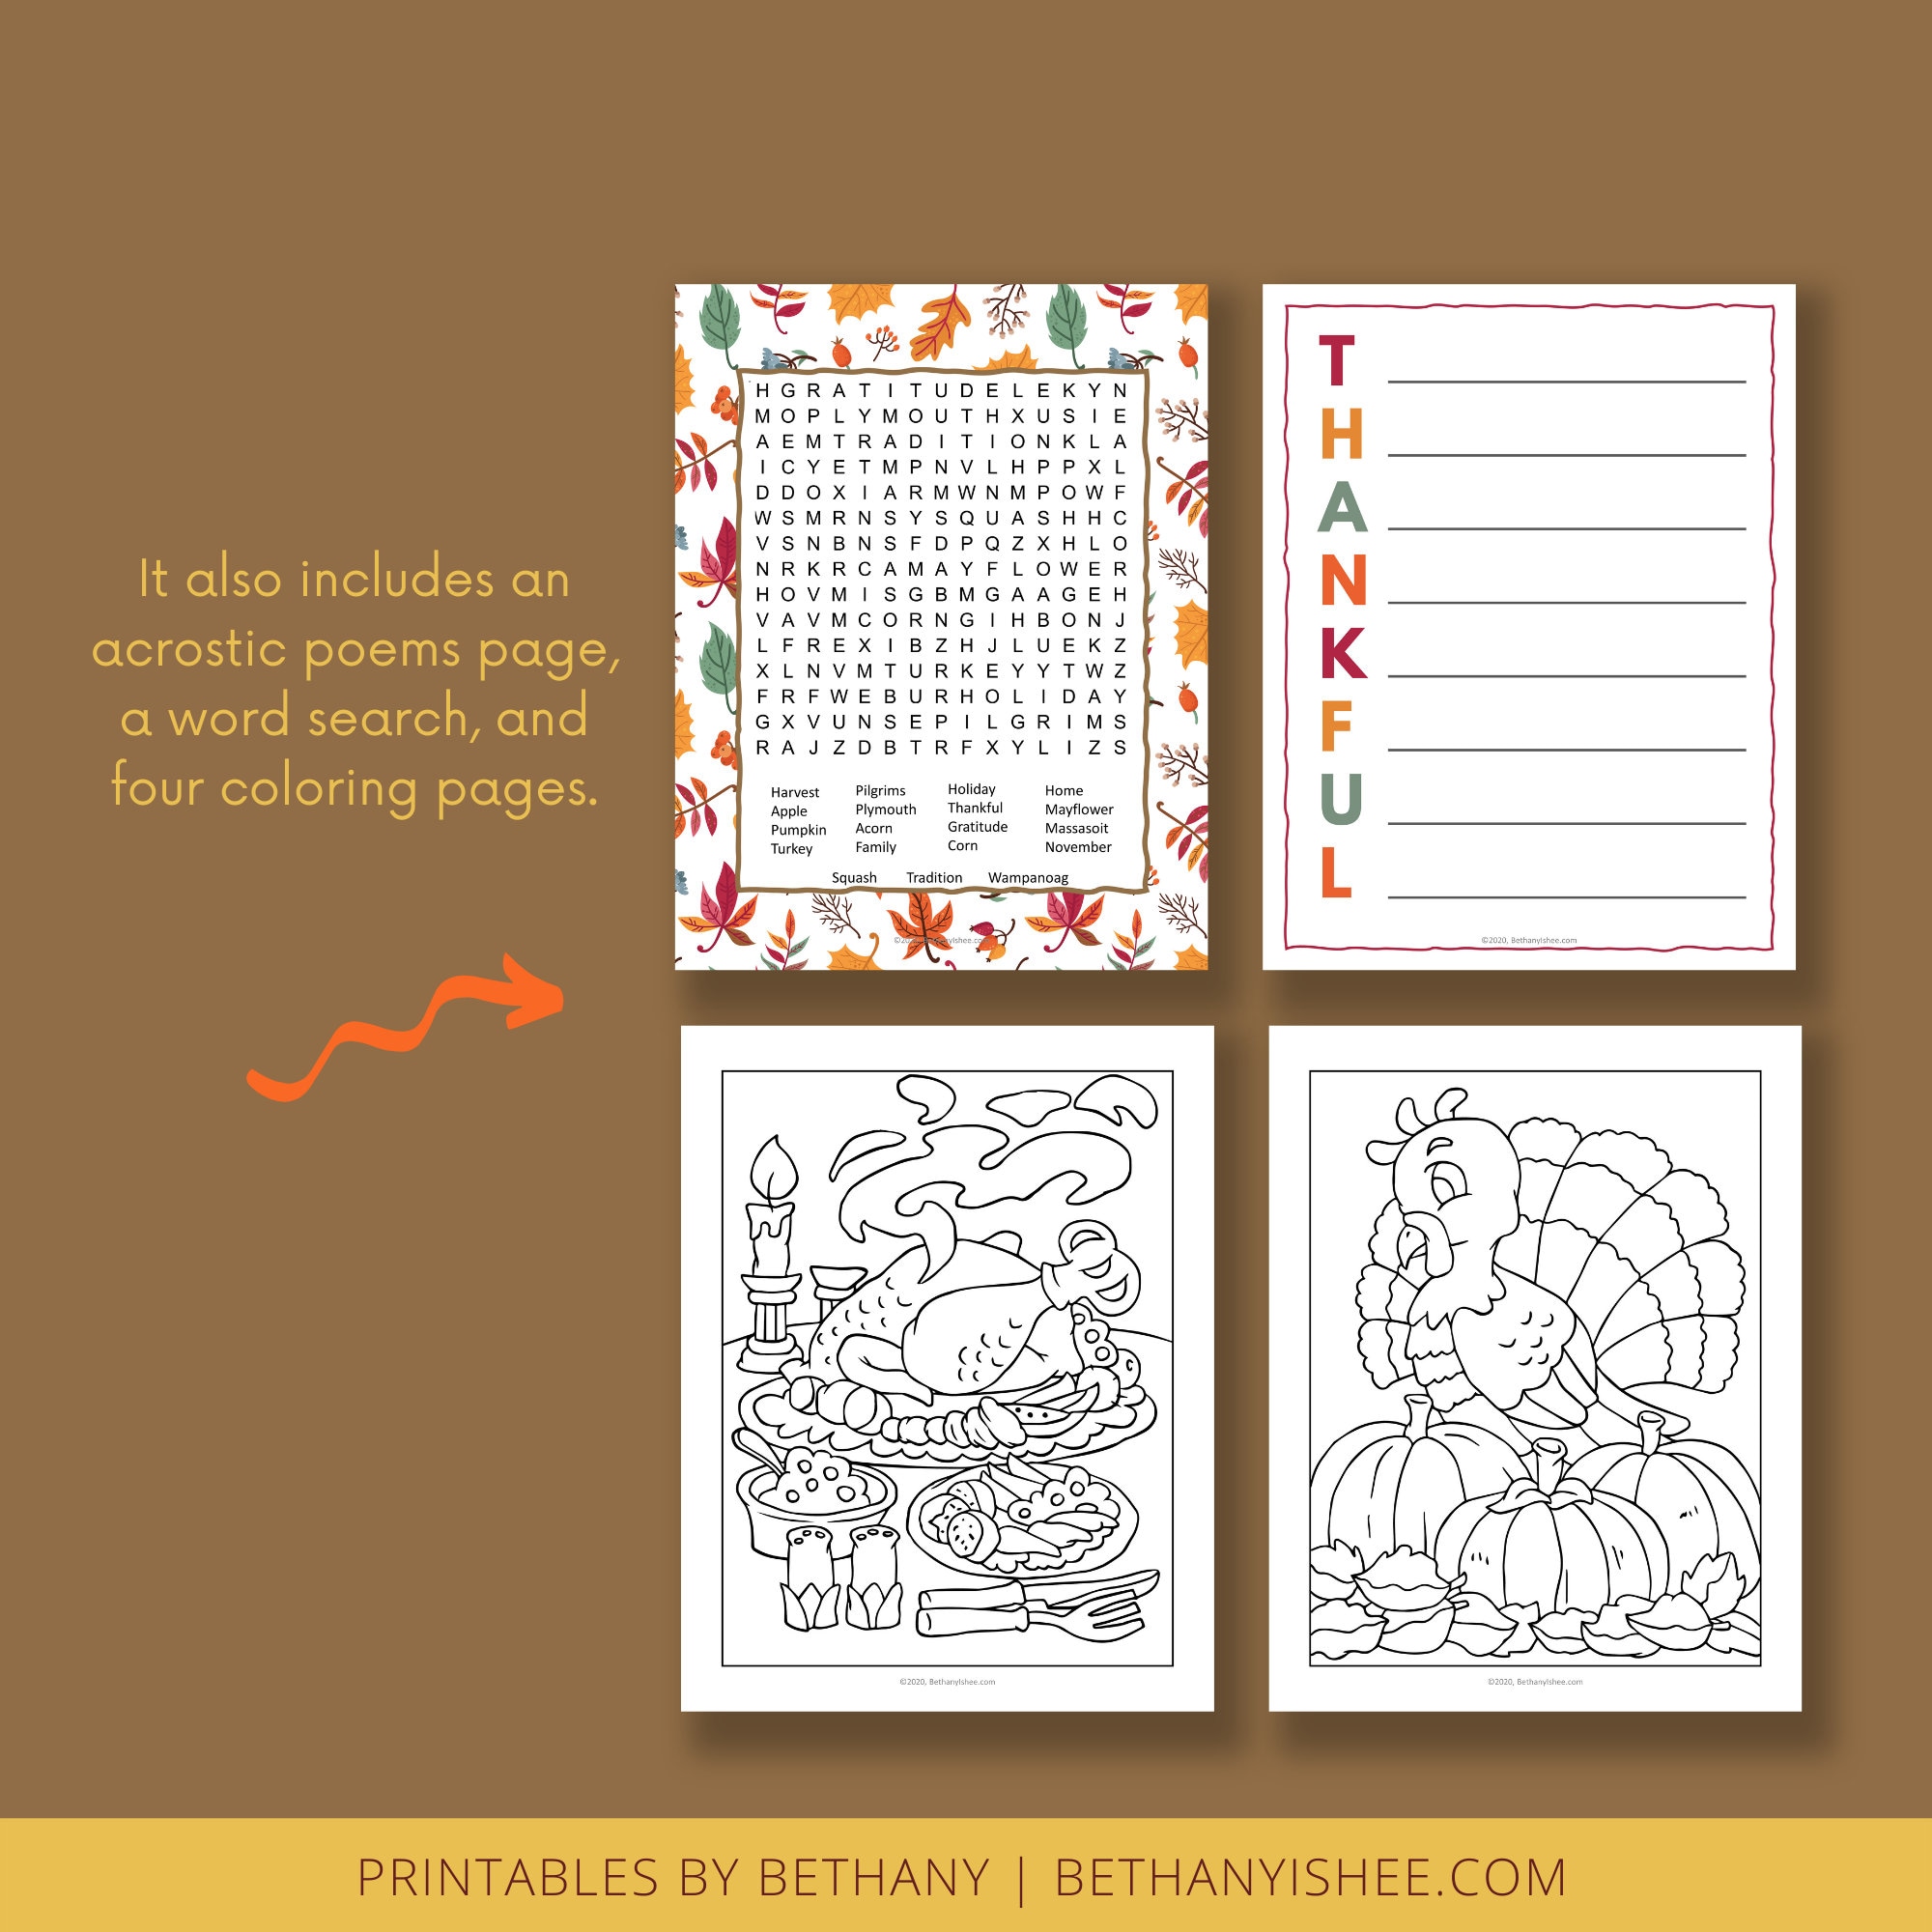 Thanksgiving poetry teatime planner copywork holiday poems for handwriting practice coloring pages and fall fun for kids